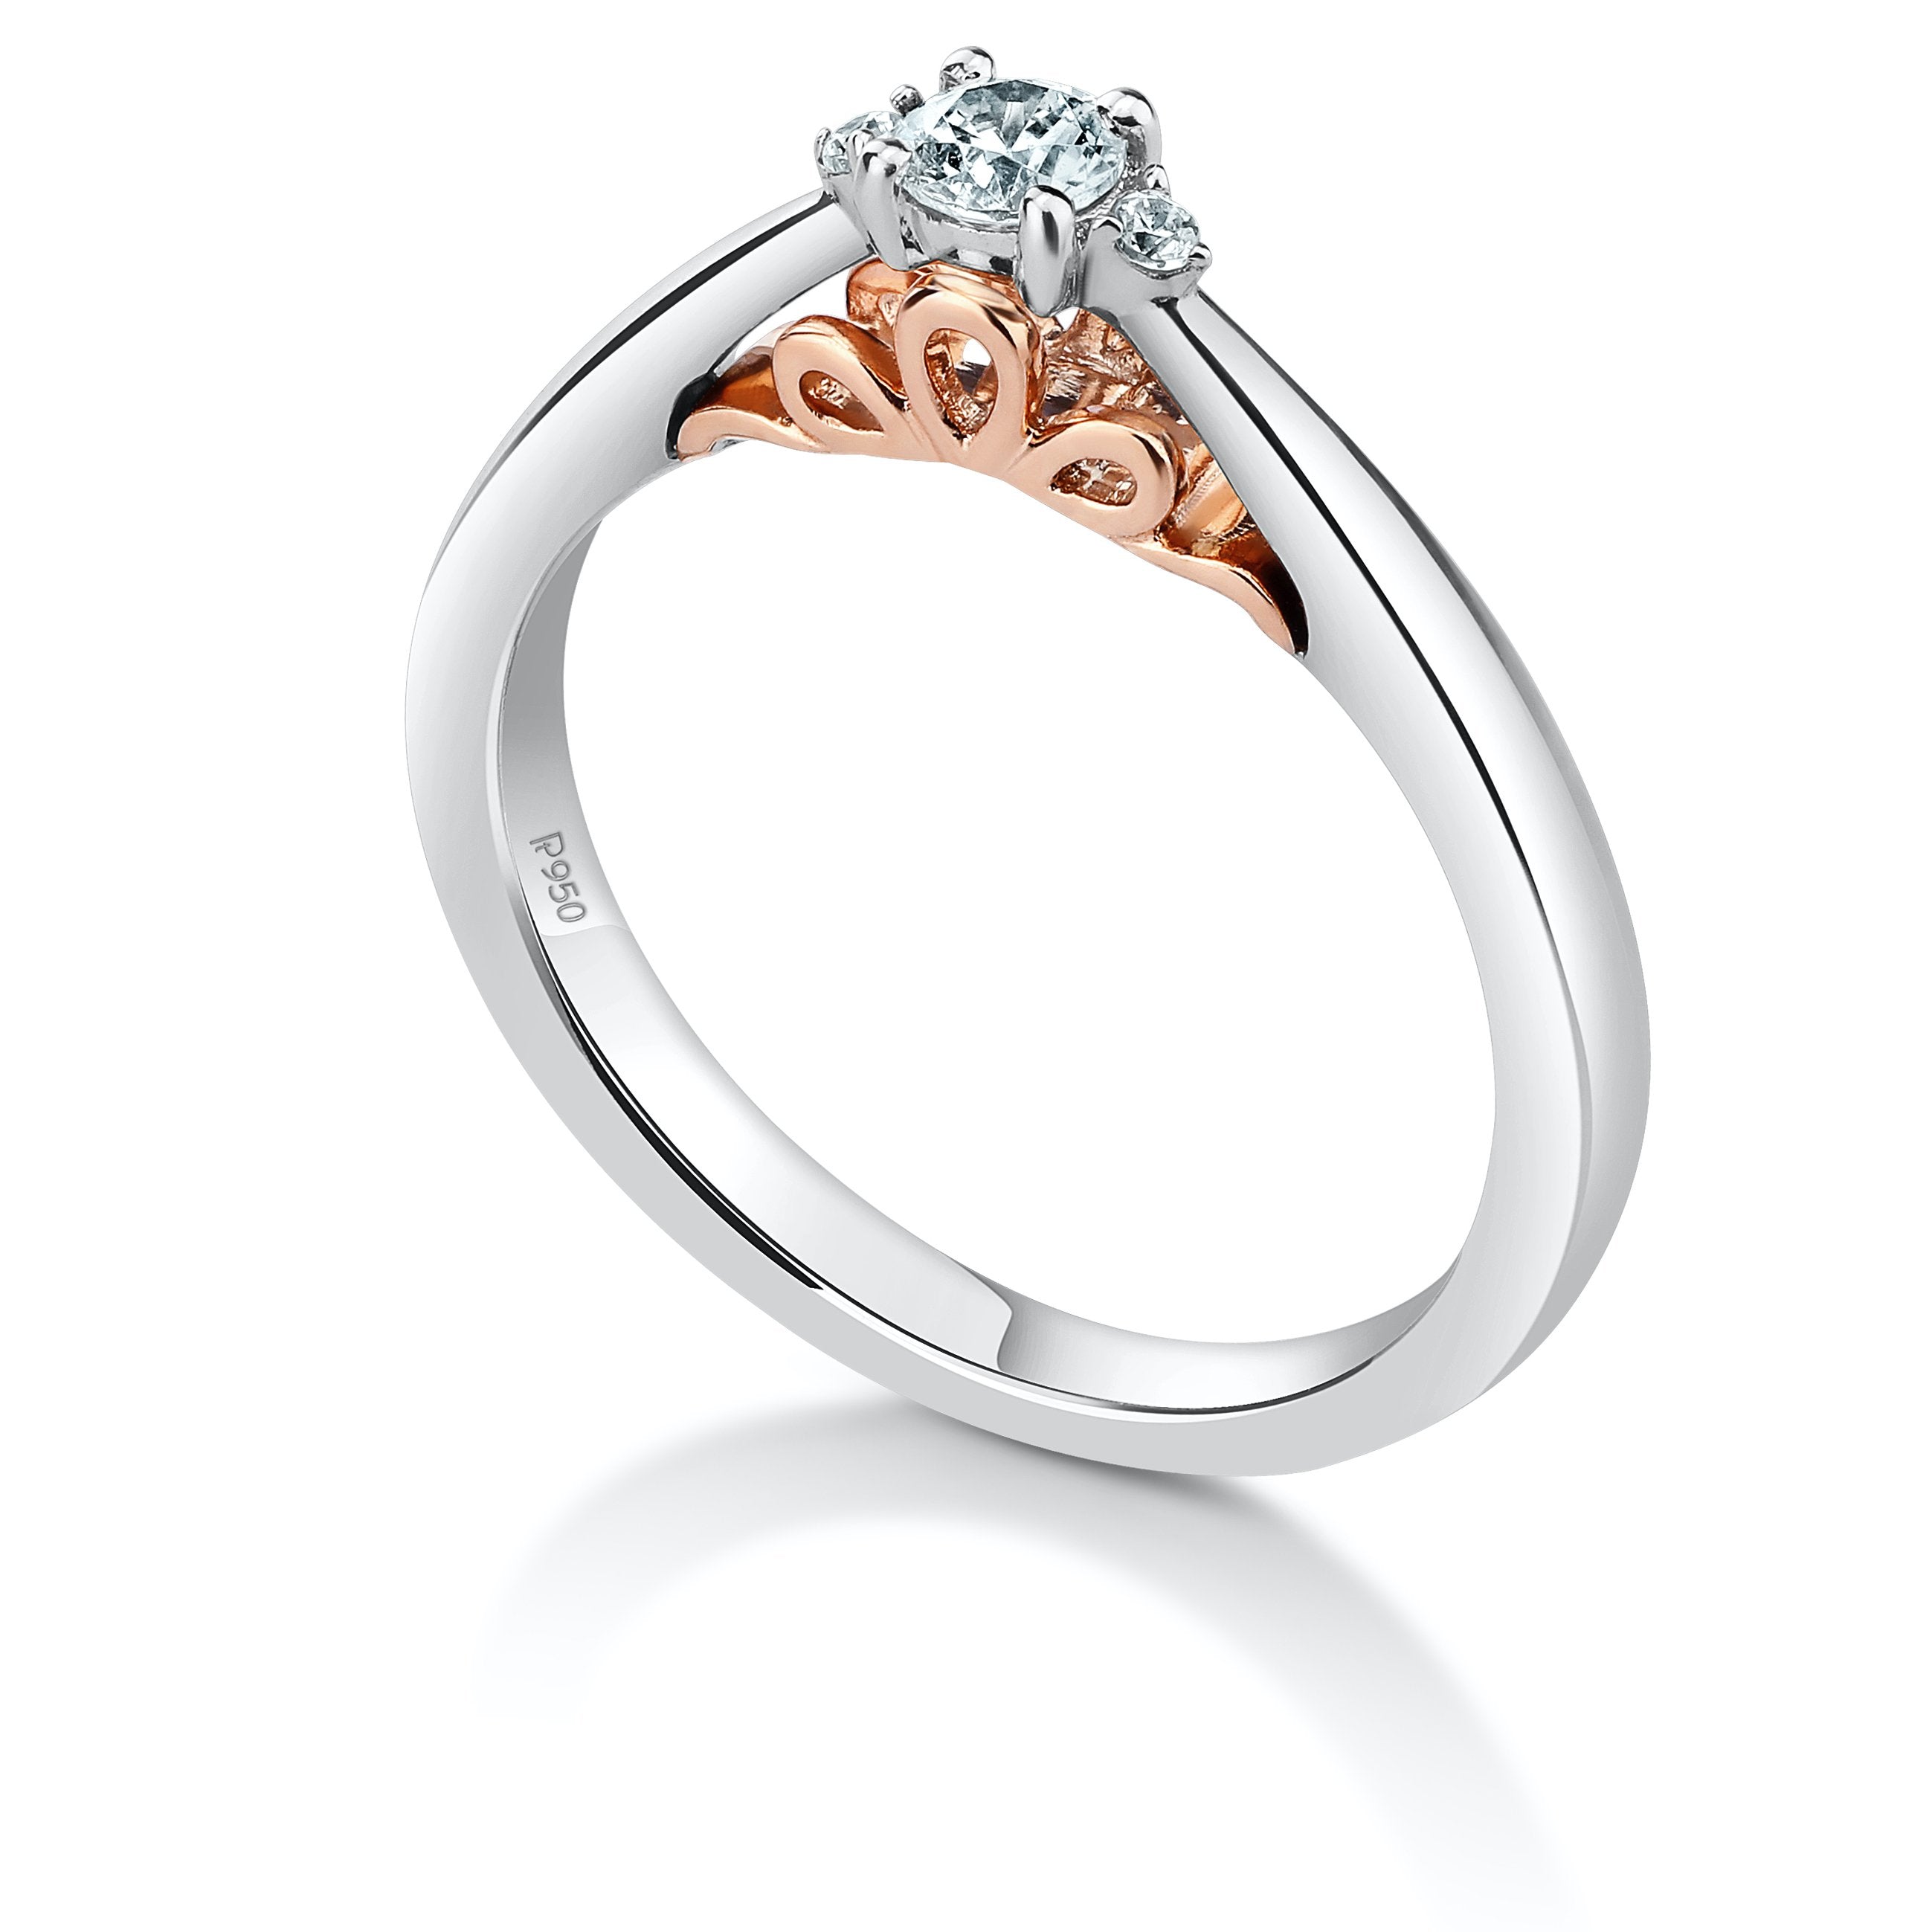 Designer Platinum Solitaire Engagement Ring with a Touch of Rose Gold JL PT 933